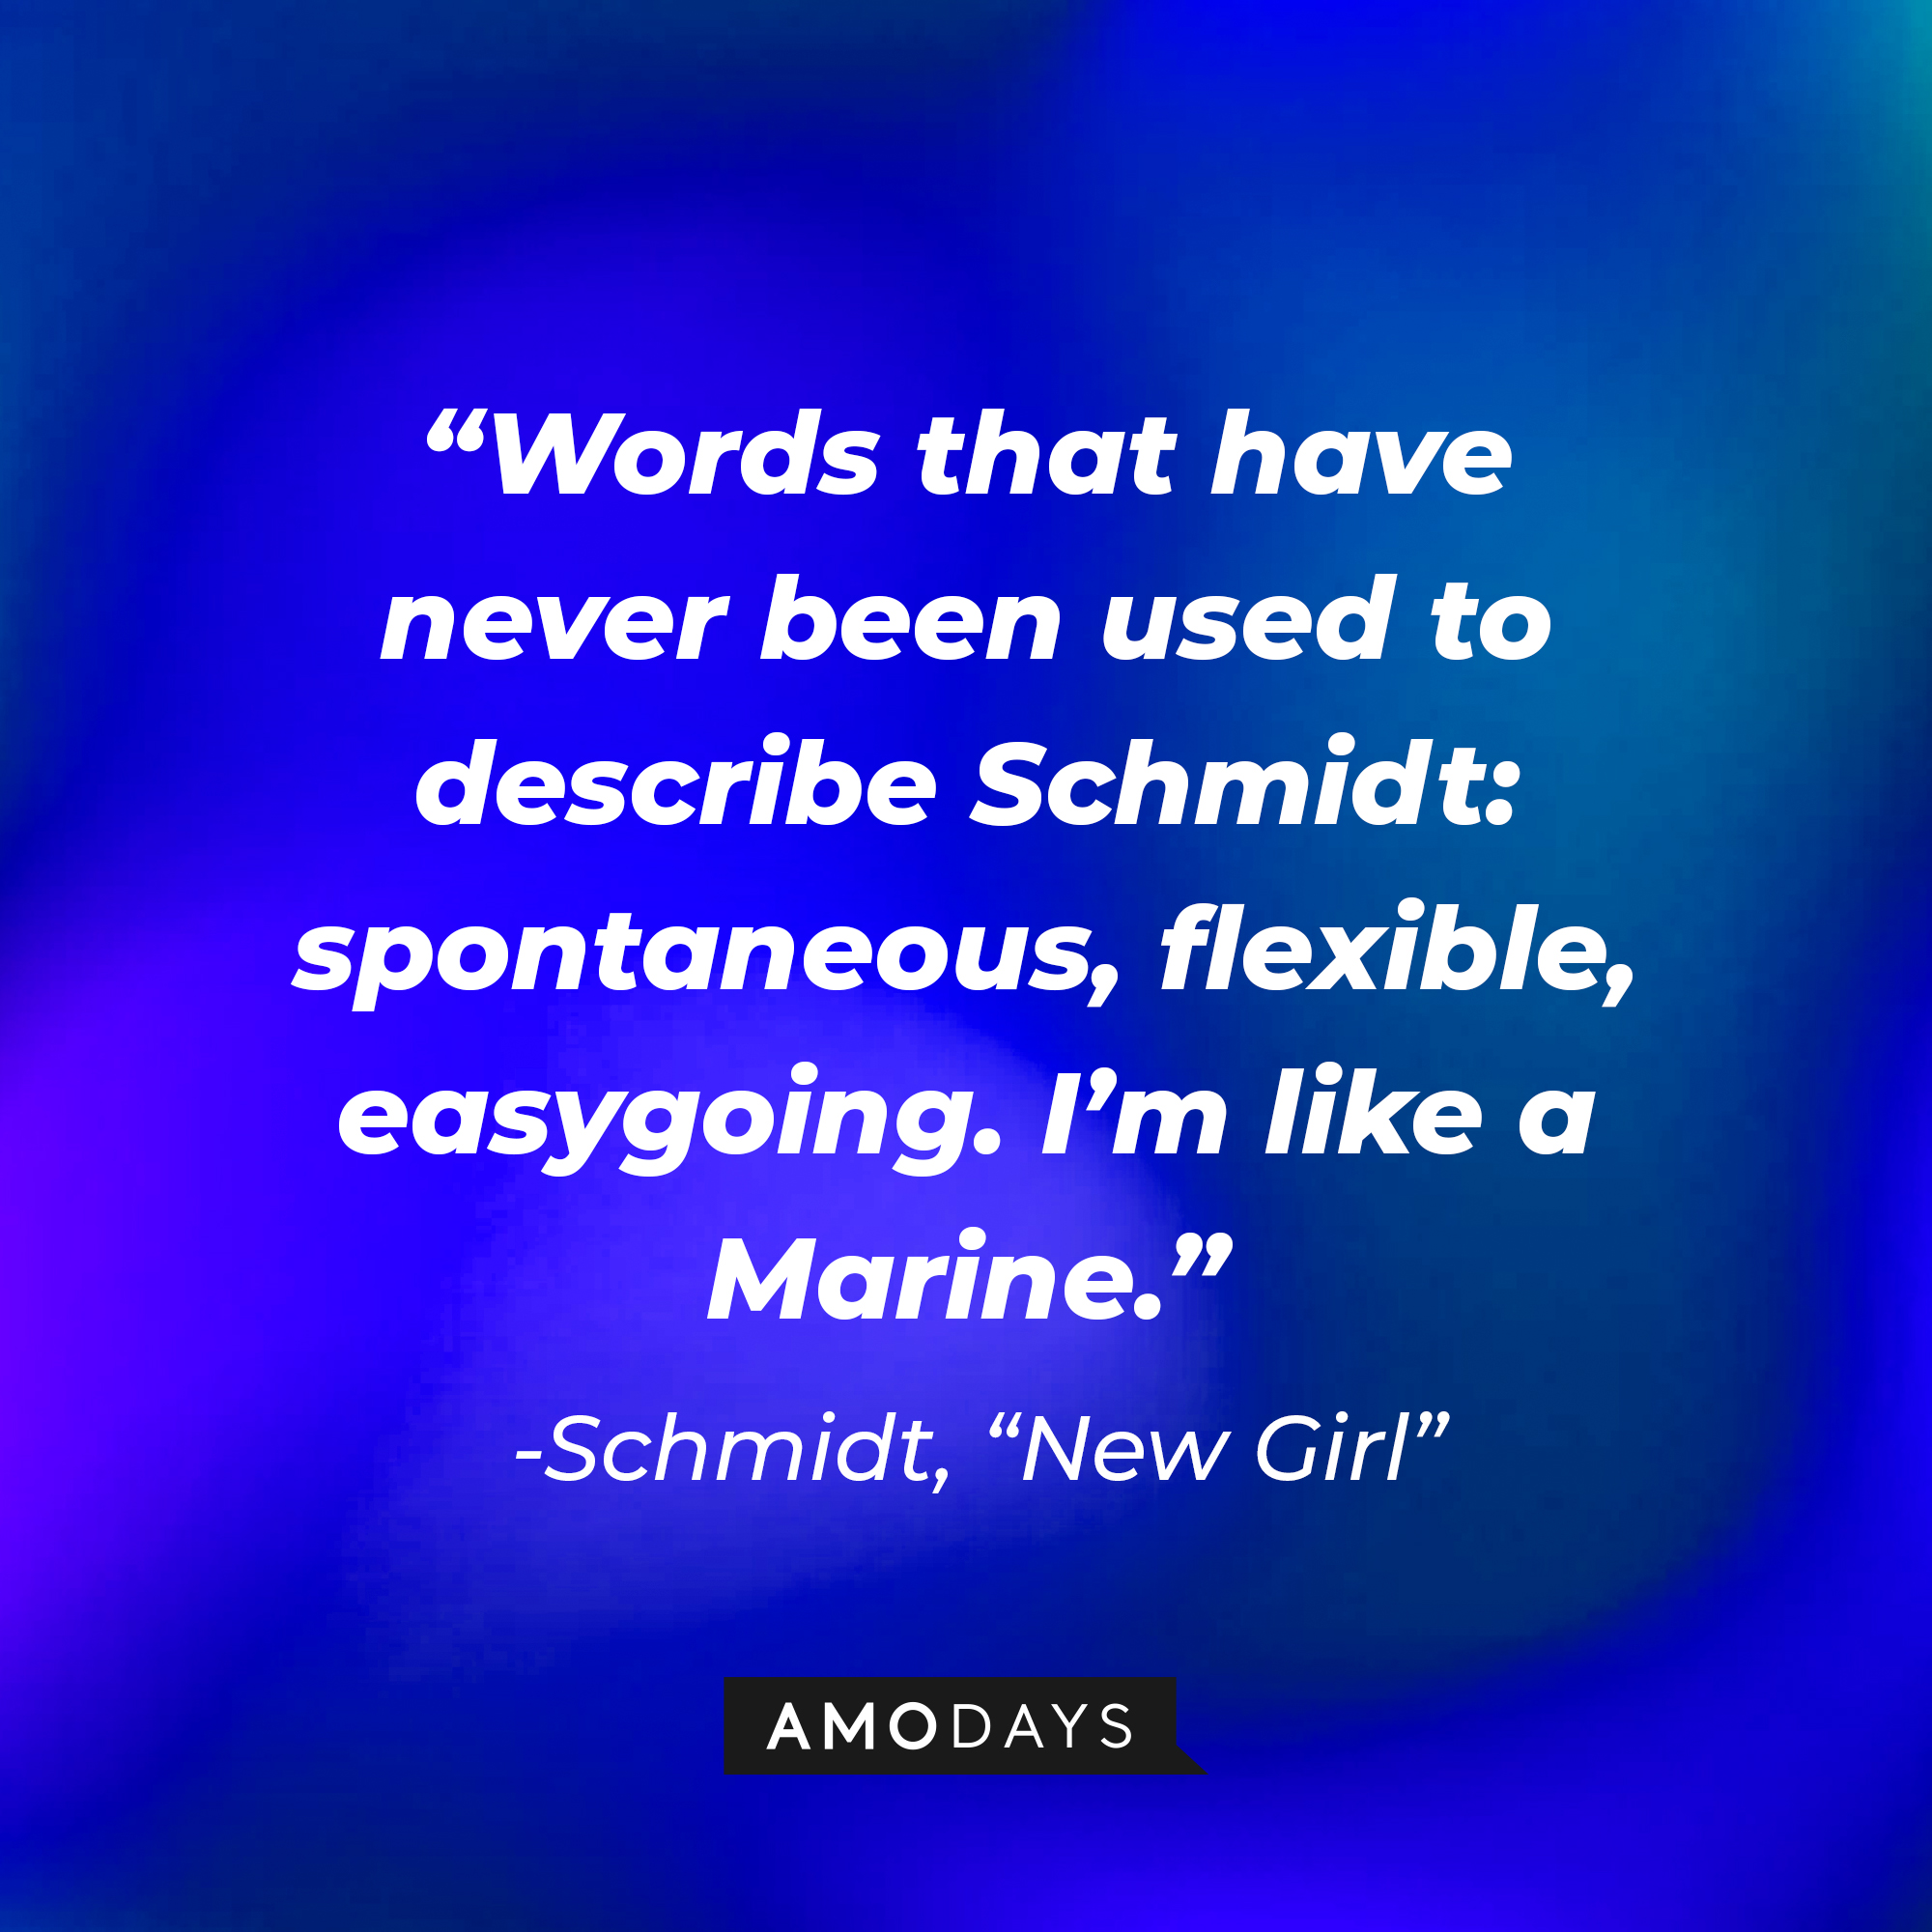 Schmidt's quote: "Words that have never been used to describe Schmidt: spontaneous, flexible, easygoing. I’m like a Marine." | Source: Amodays